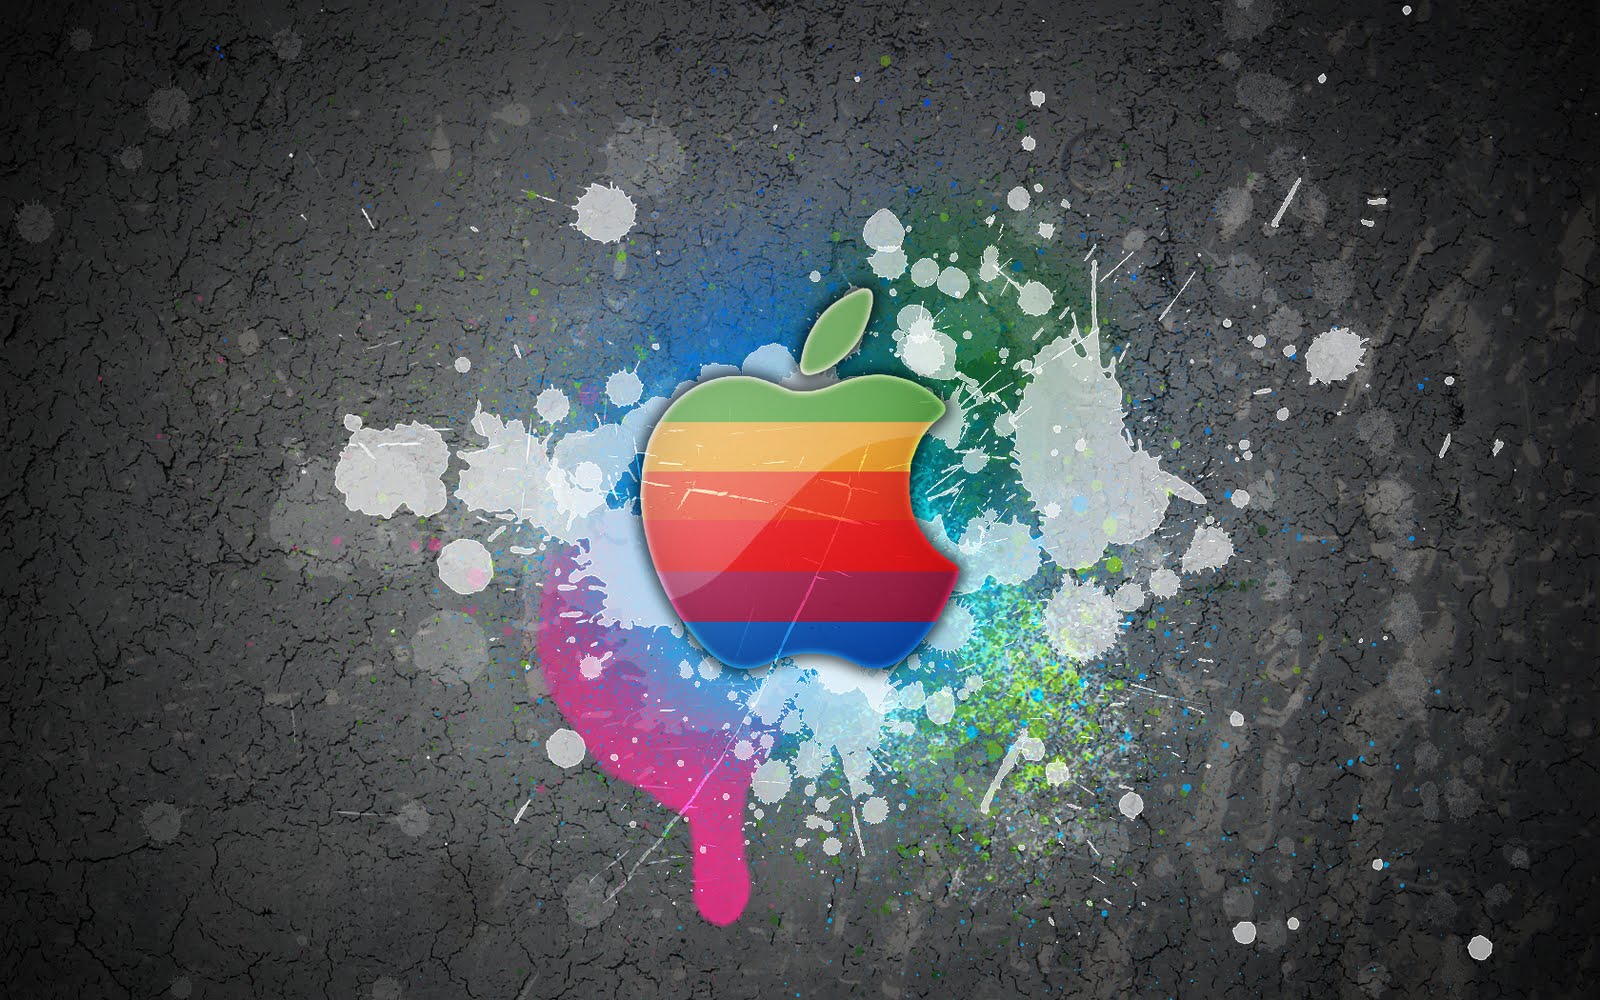 Apple Mac Abstract 3d Wallpaper HD Awesome